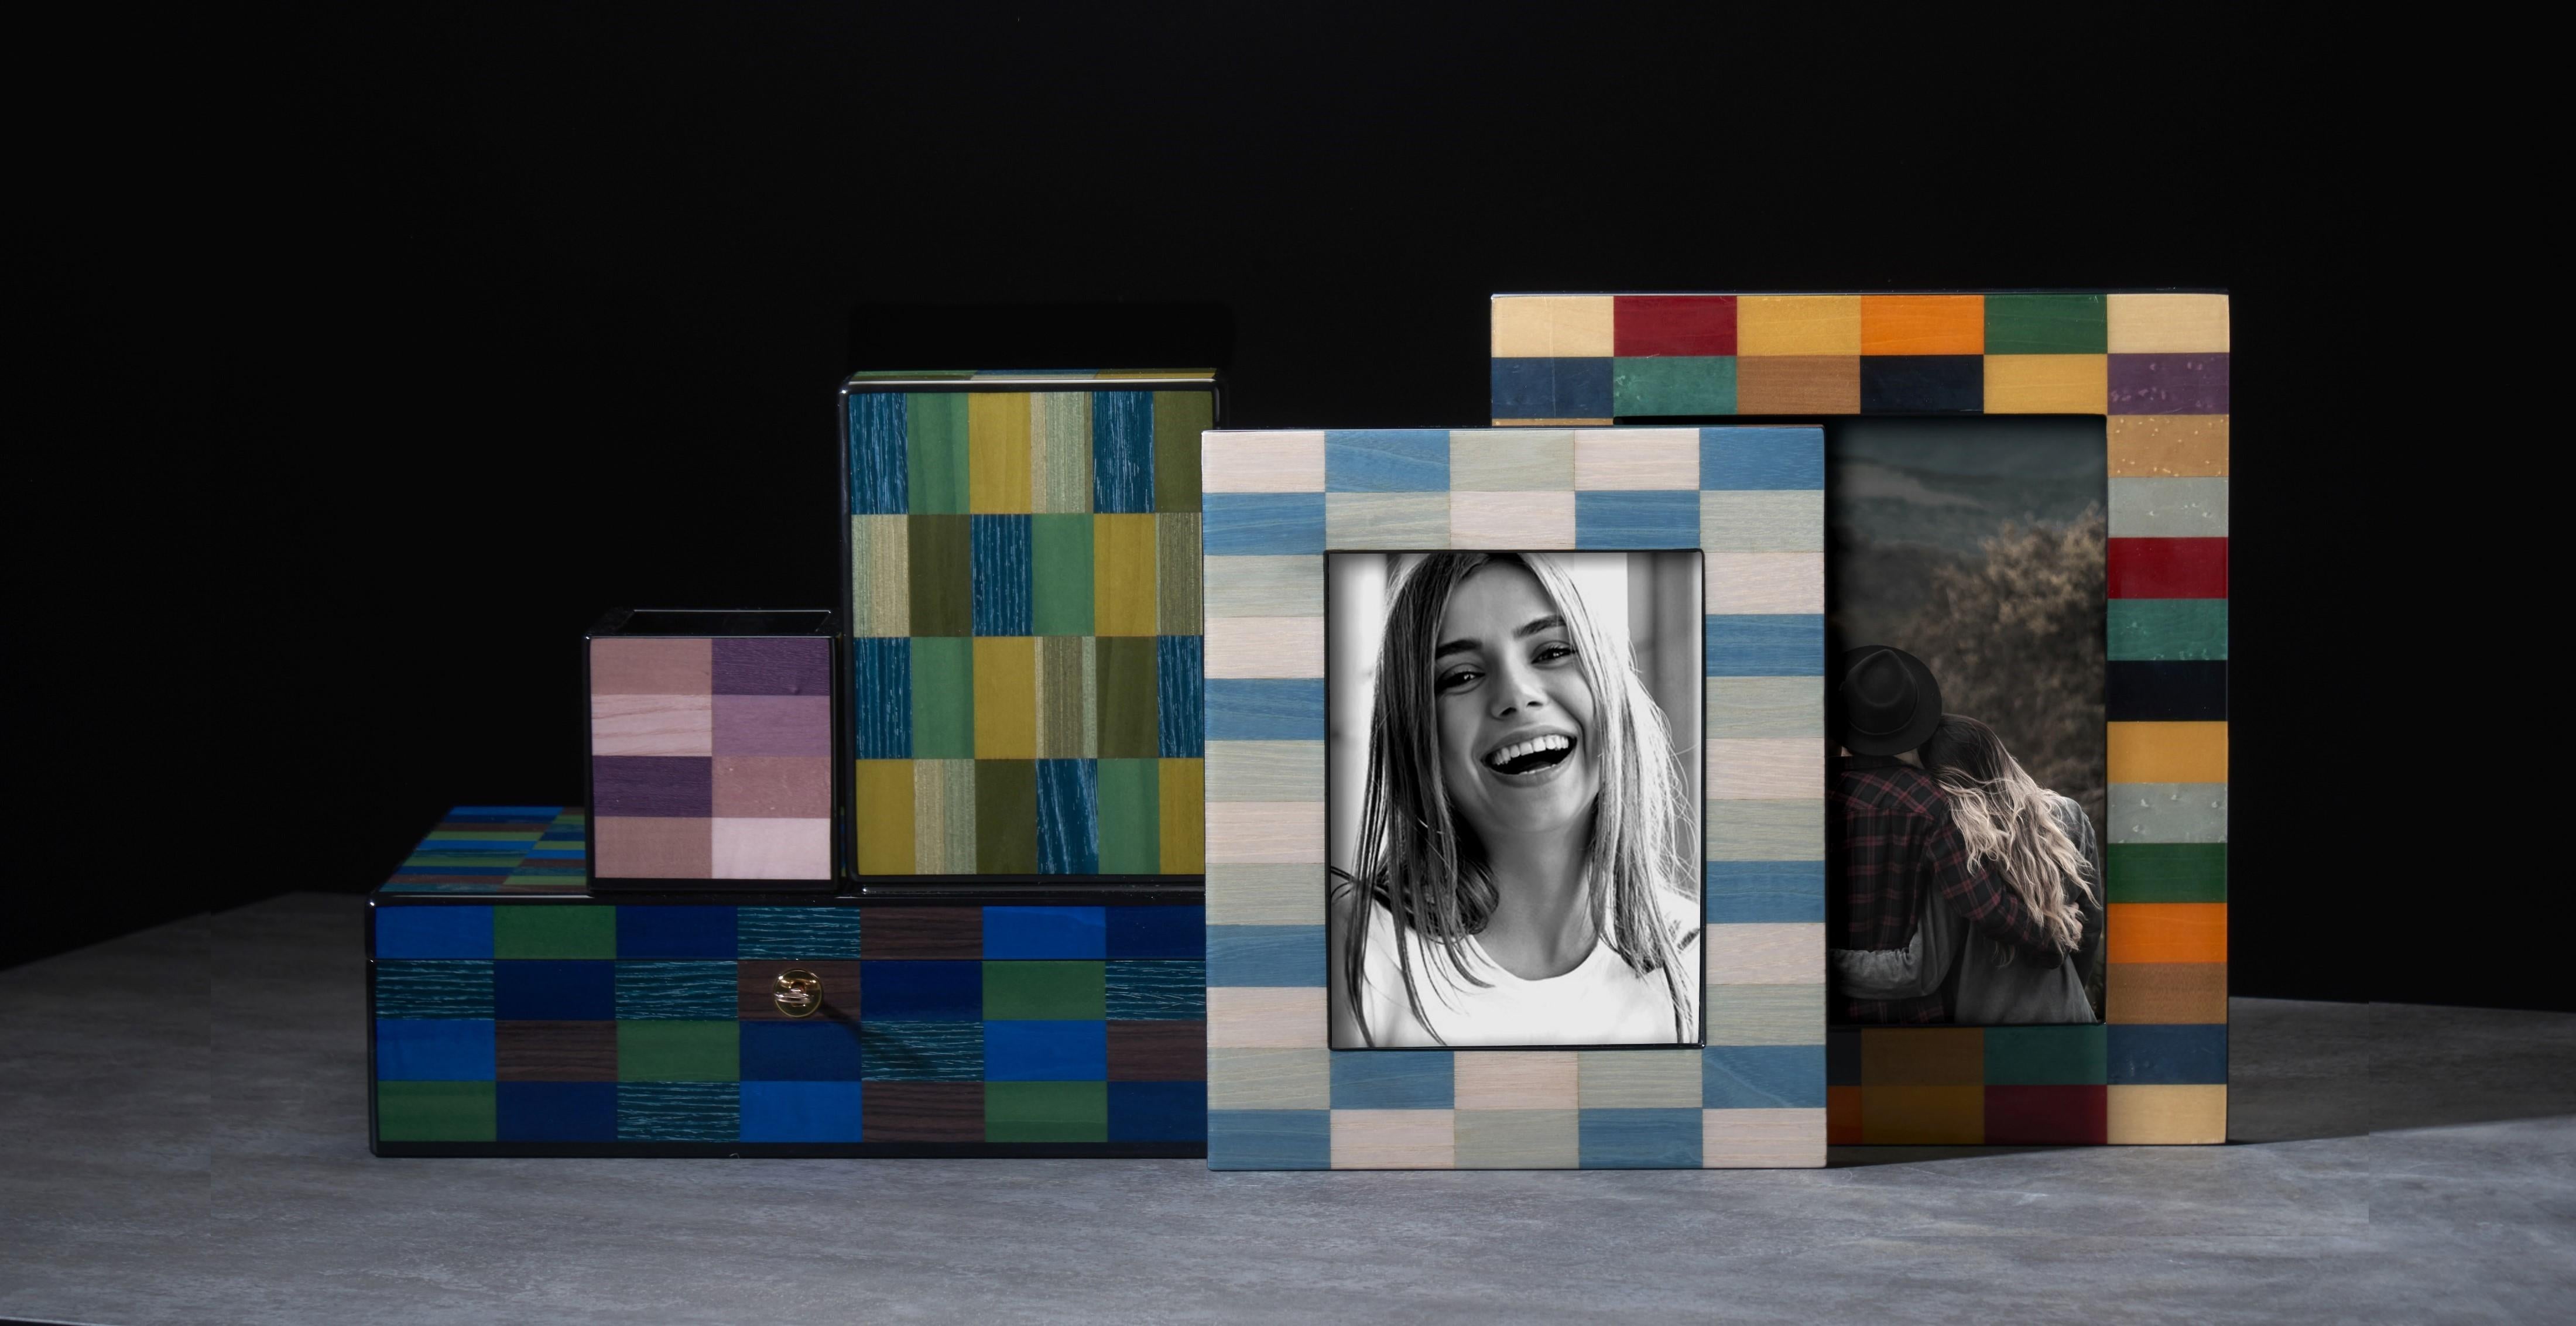 An original and elegant gift idea for a loved one, this photo frame is part of the Venezia Laguna Collection of design objects characterized by geometric motifs inspired by modern art. Entirely handcrafted from wood, this photo frame features a bold